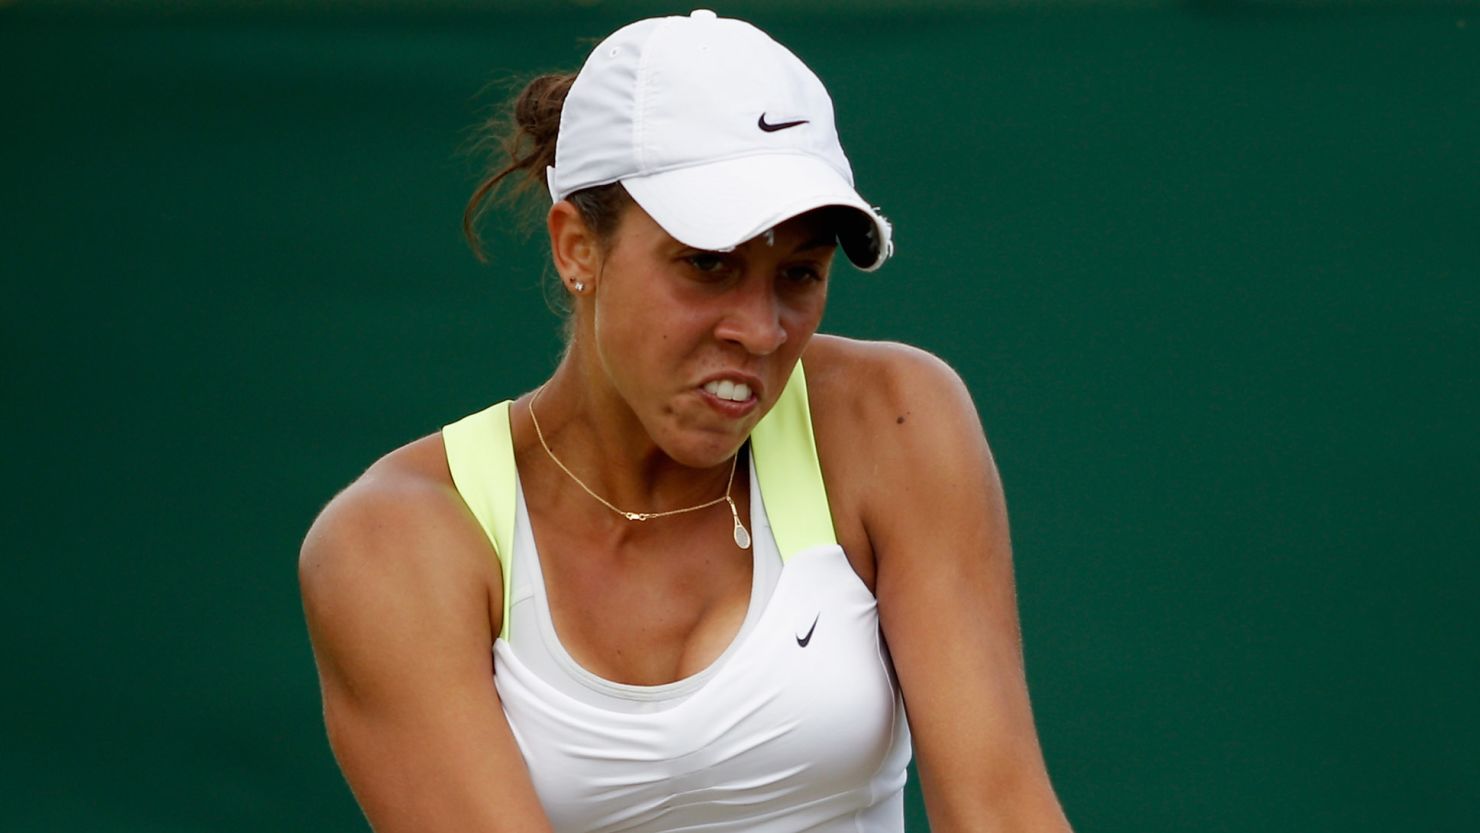 American Madison Keys has played at two previous grand slams, winning one match.